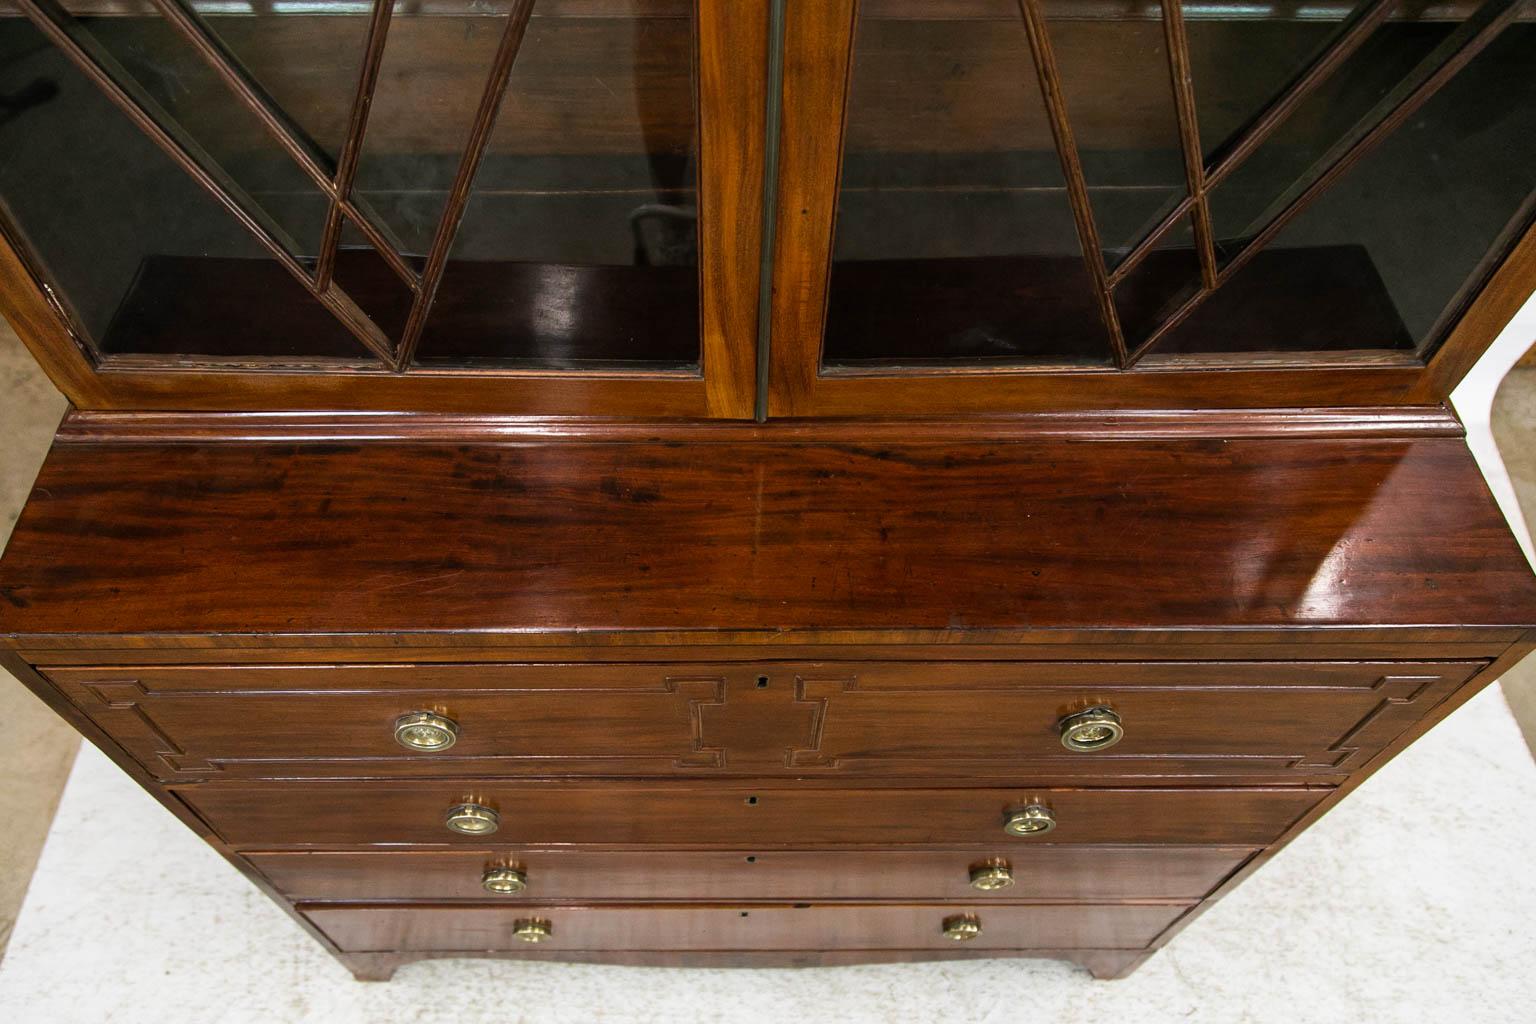 This English mahogany secretaire has its original wavy glass. The interior has ten drawers and six cubby holes. The brasses are later.